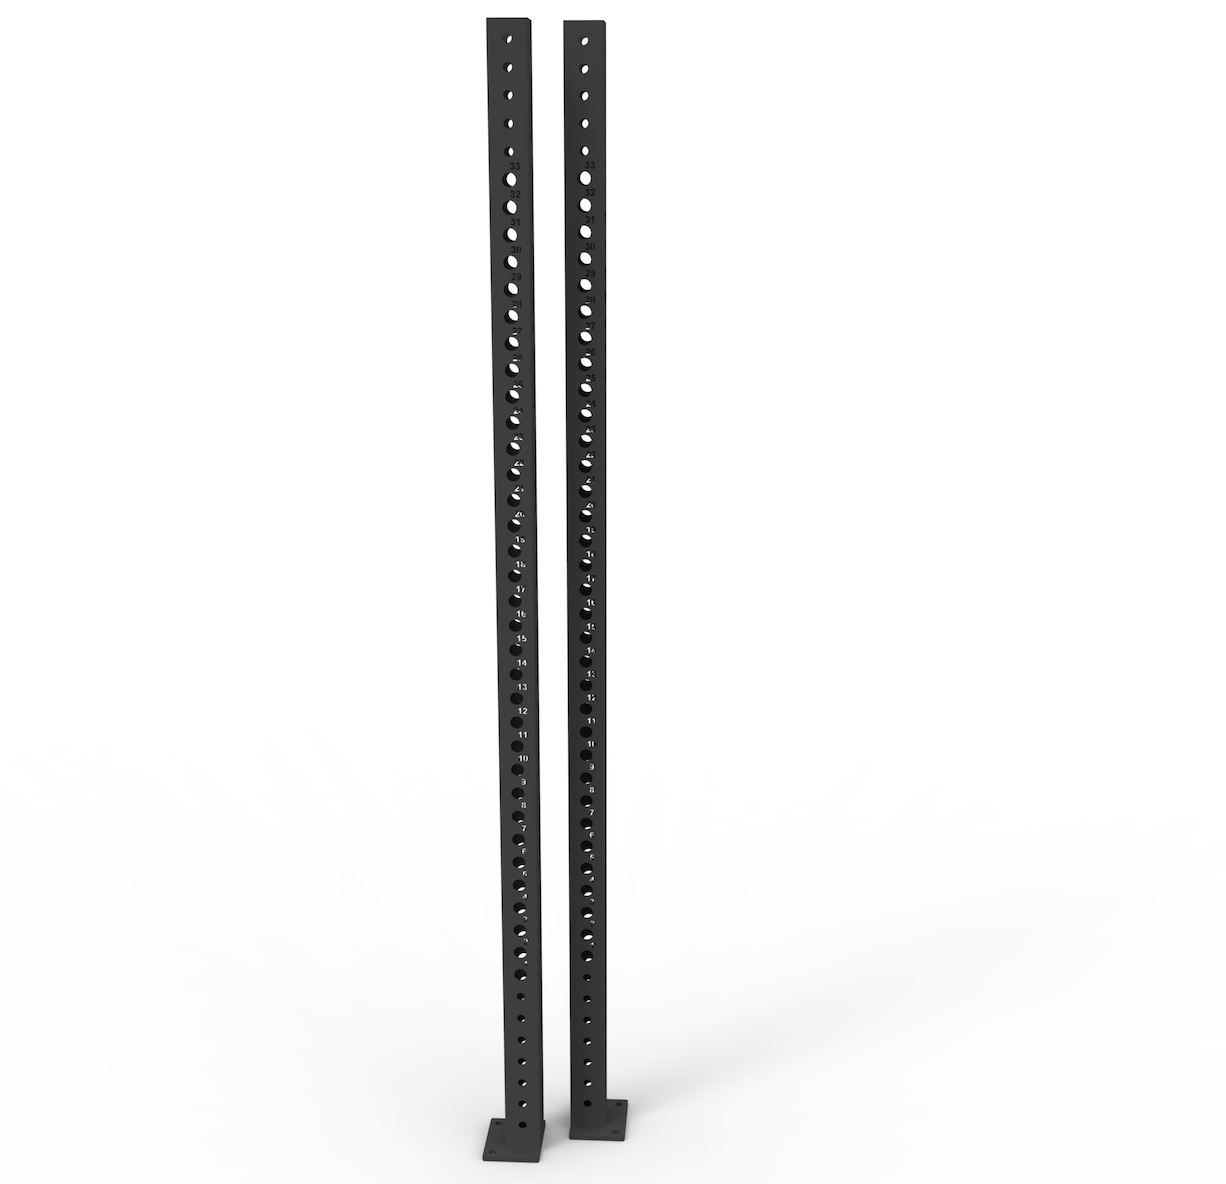 Rack Upright or Crossbeam Attachment Options | In Stock -Catch Fitness